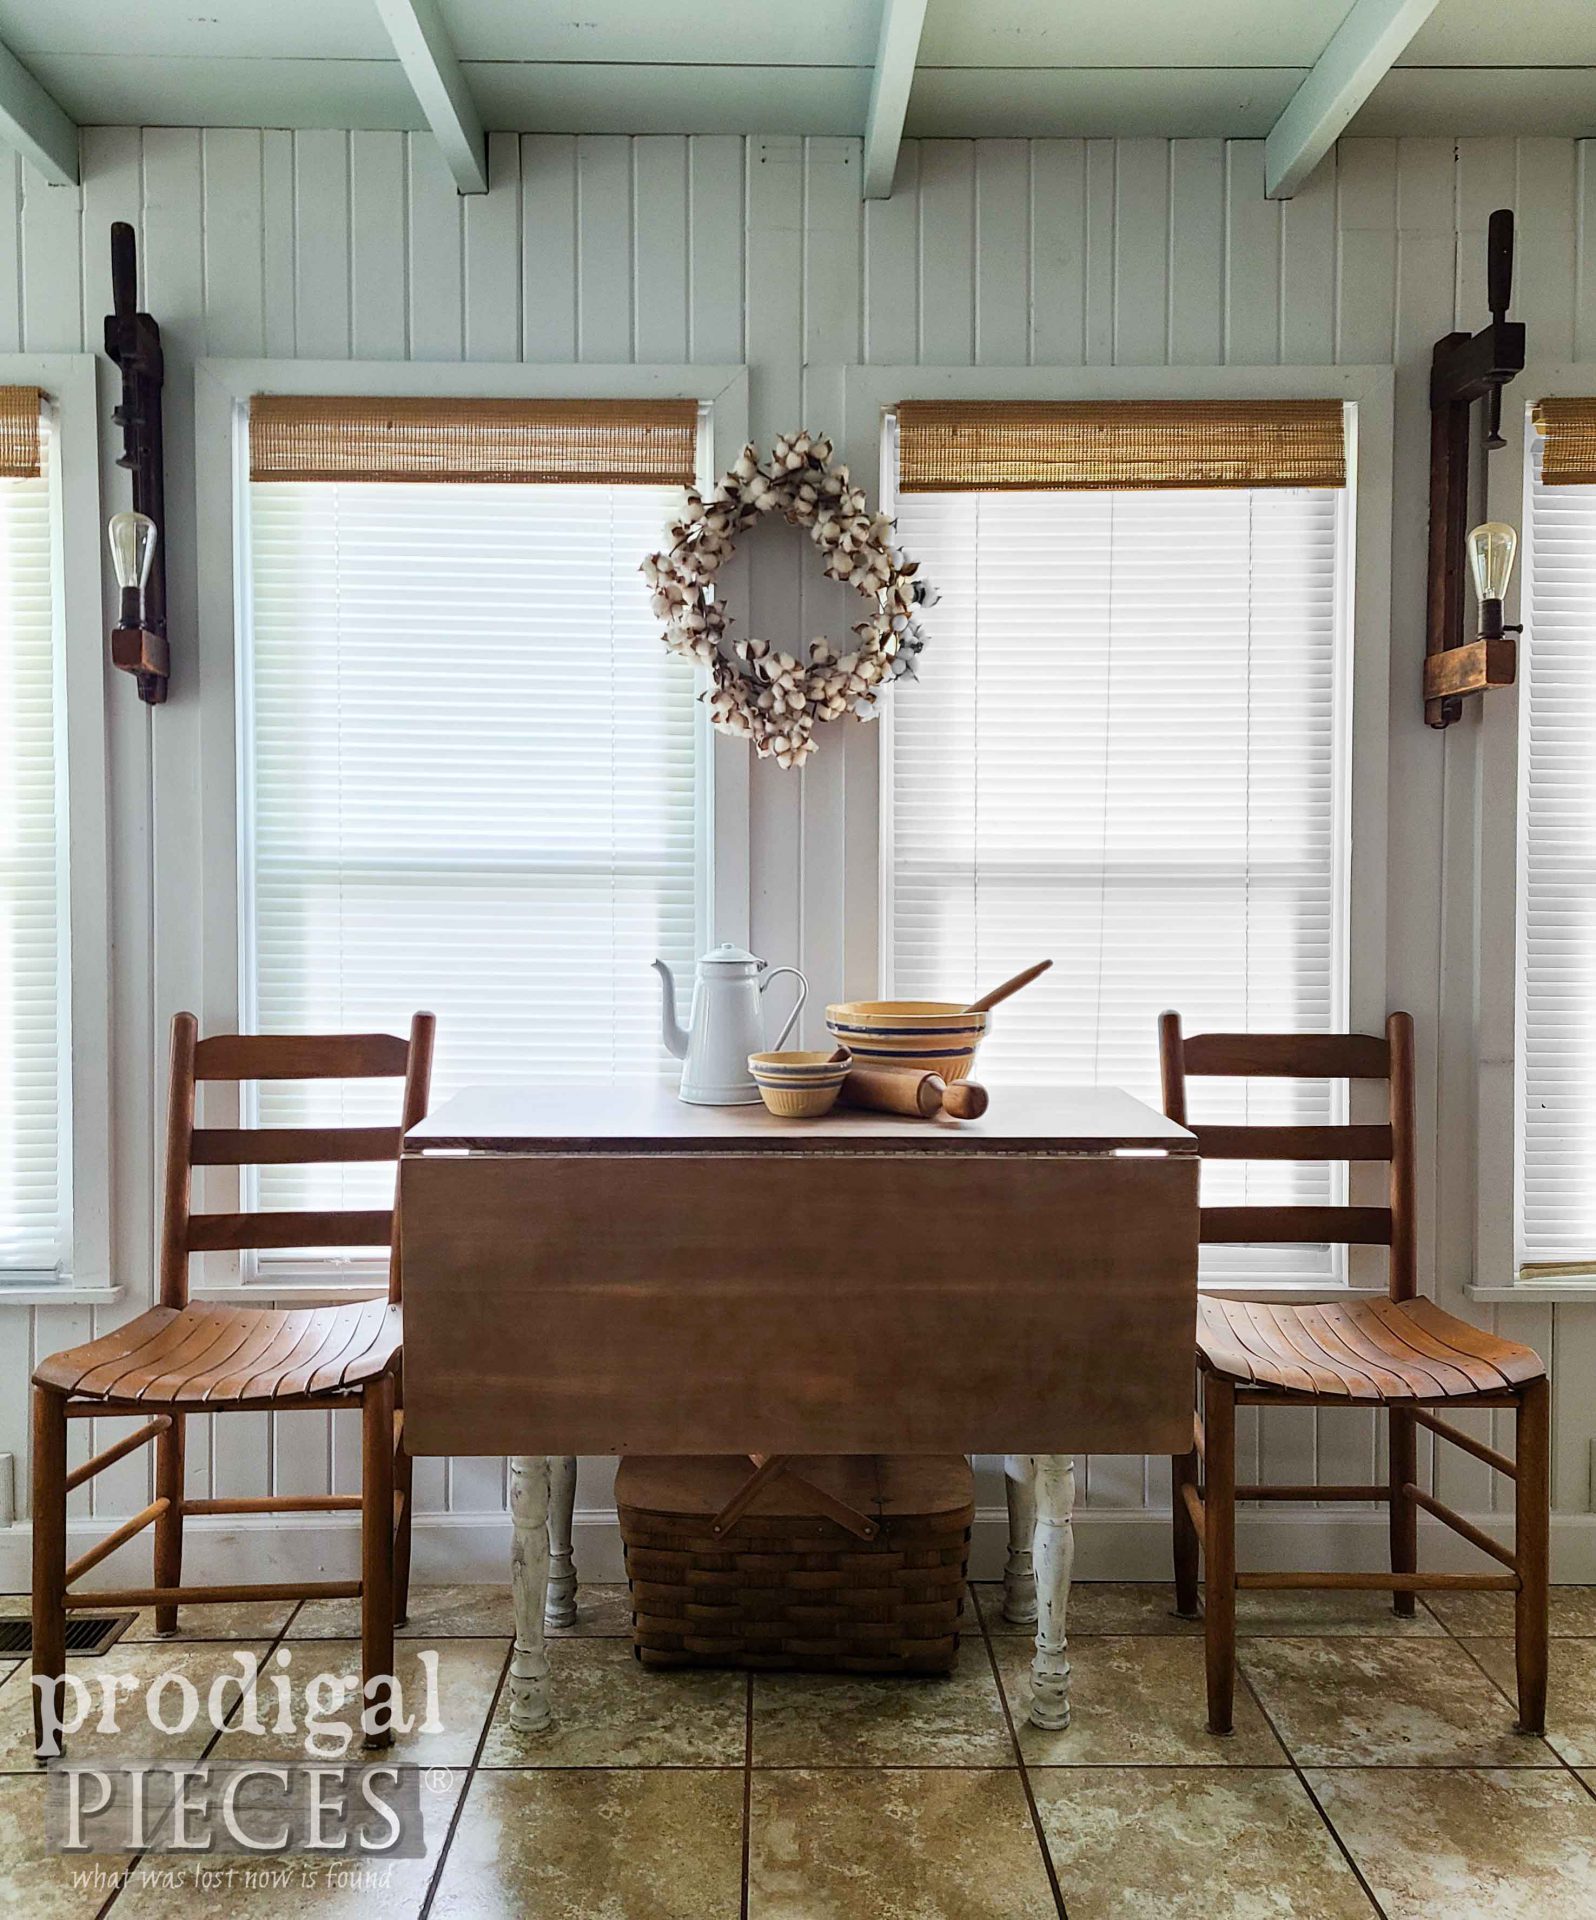 Vintage Farmhouse Drop-Leaf Dining Table Makeover by Larissa of Prodigal Pieces | prodigalpieces.com #prodigalpieces #farmhouse #vintage #furniture #diy